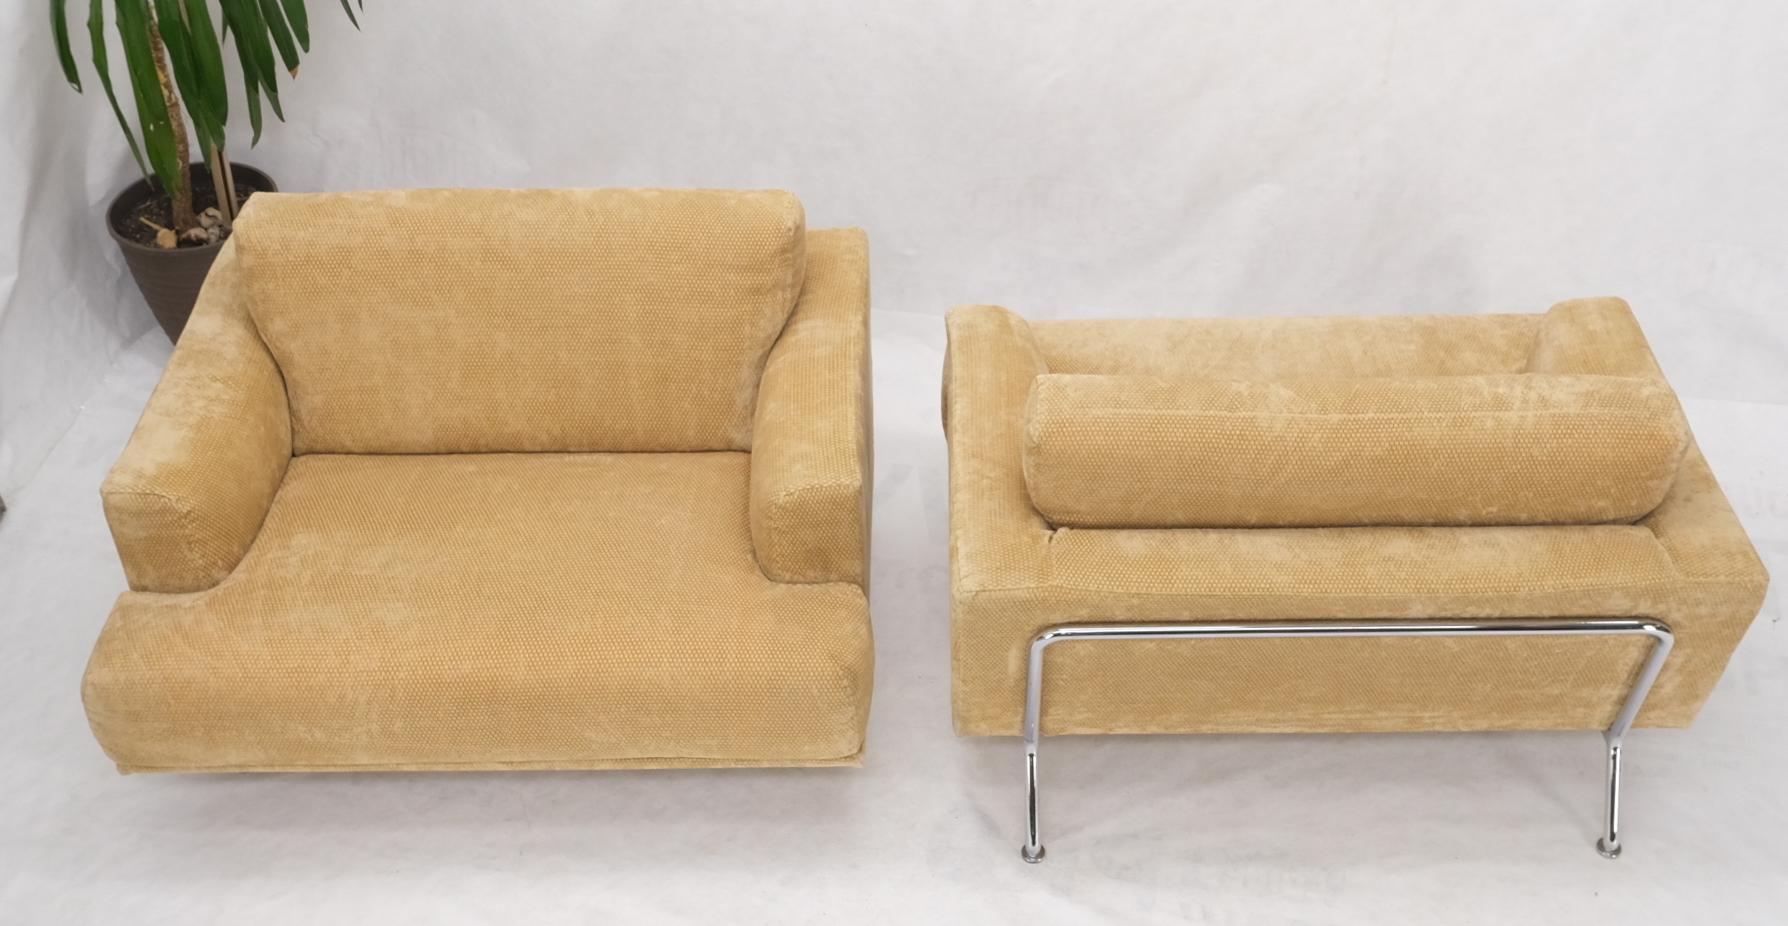 Pair of Wide Seat Almost Sattee Width Lounge Chairs by Cassina For Sale 10